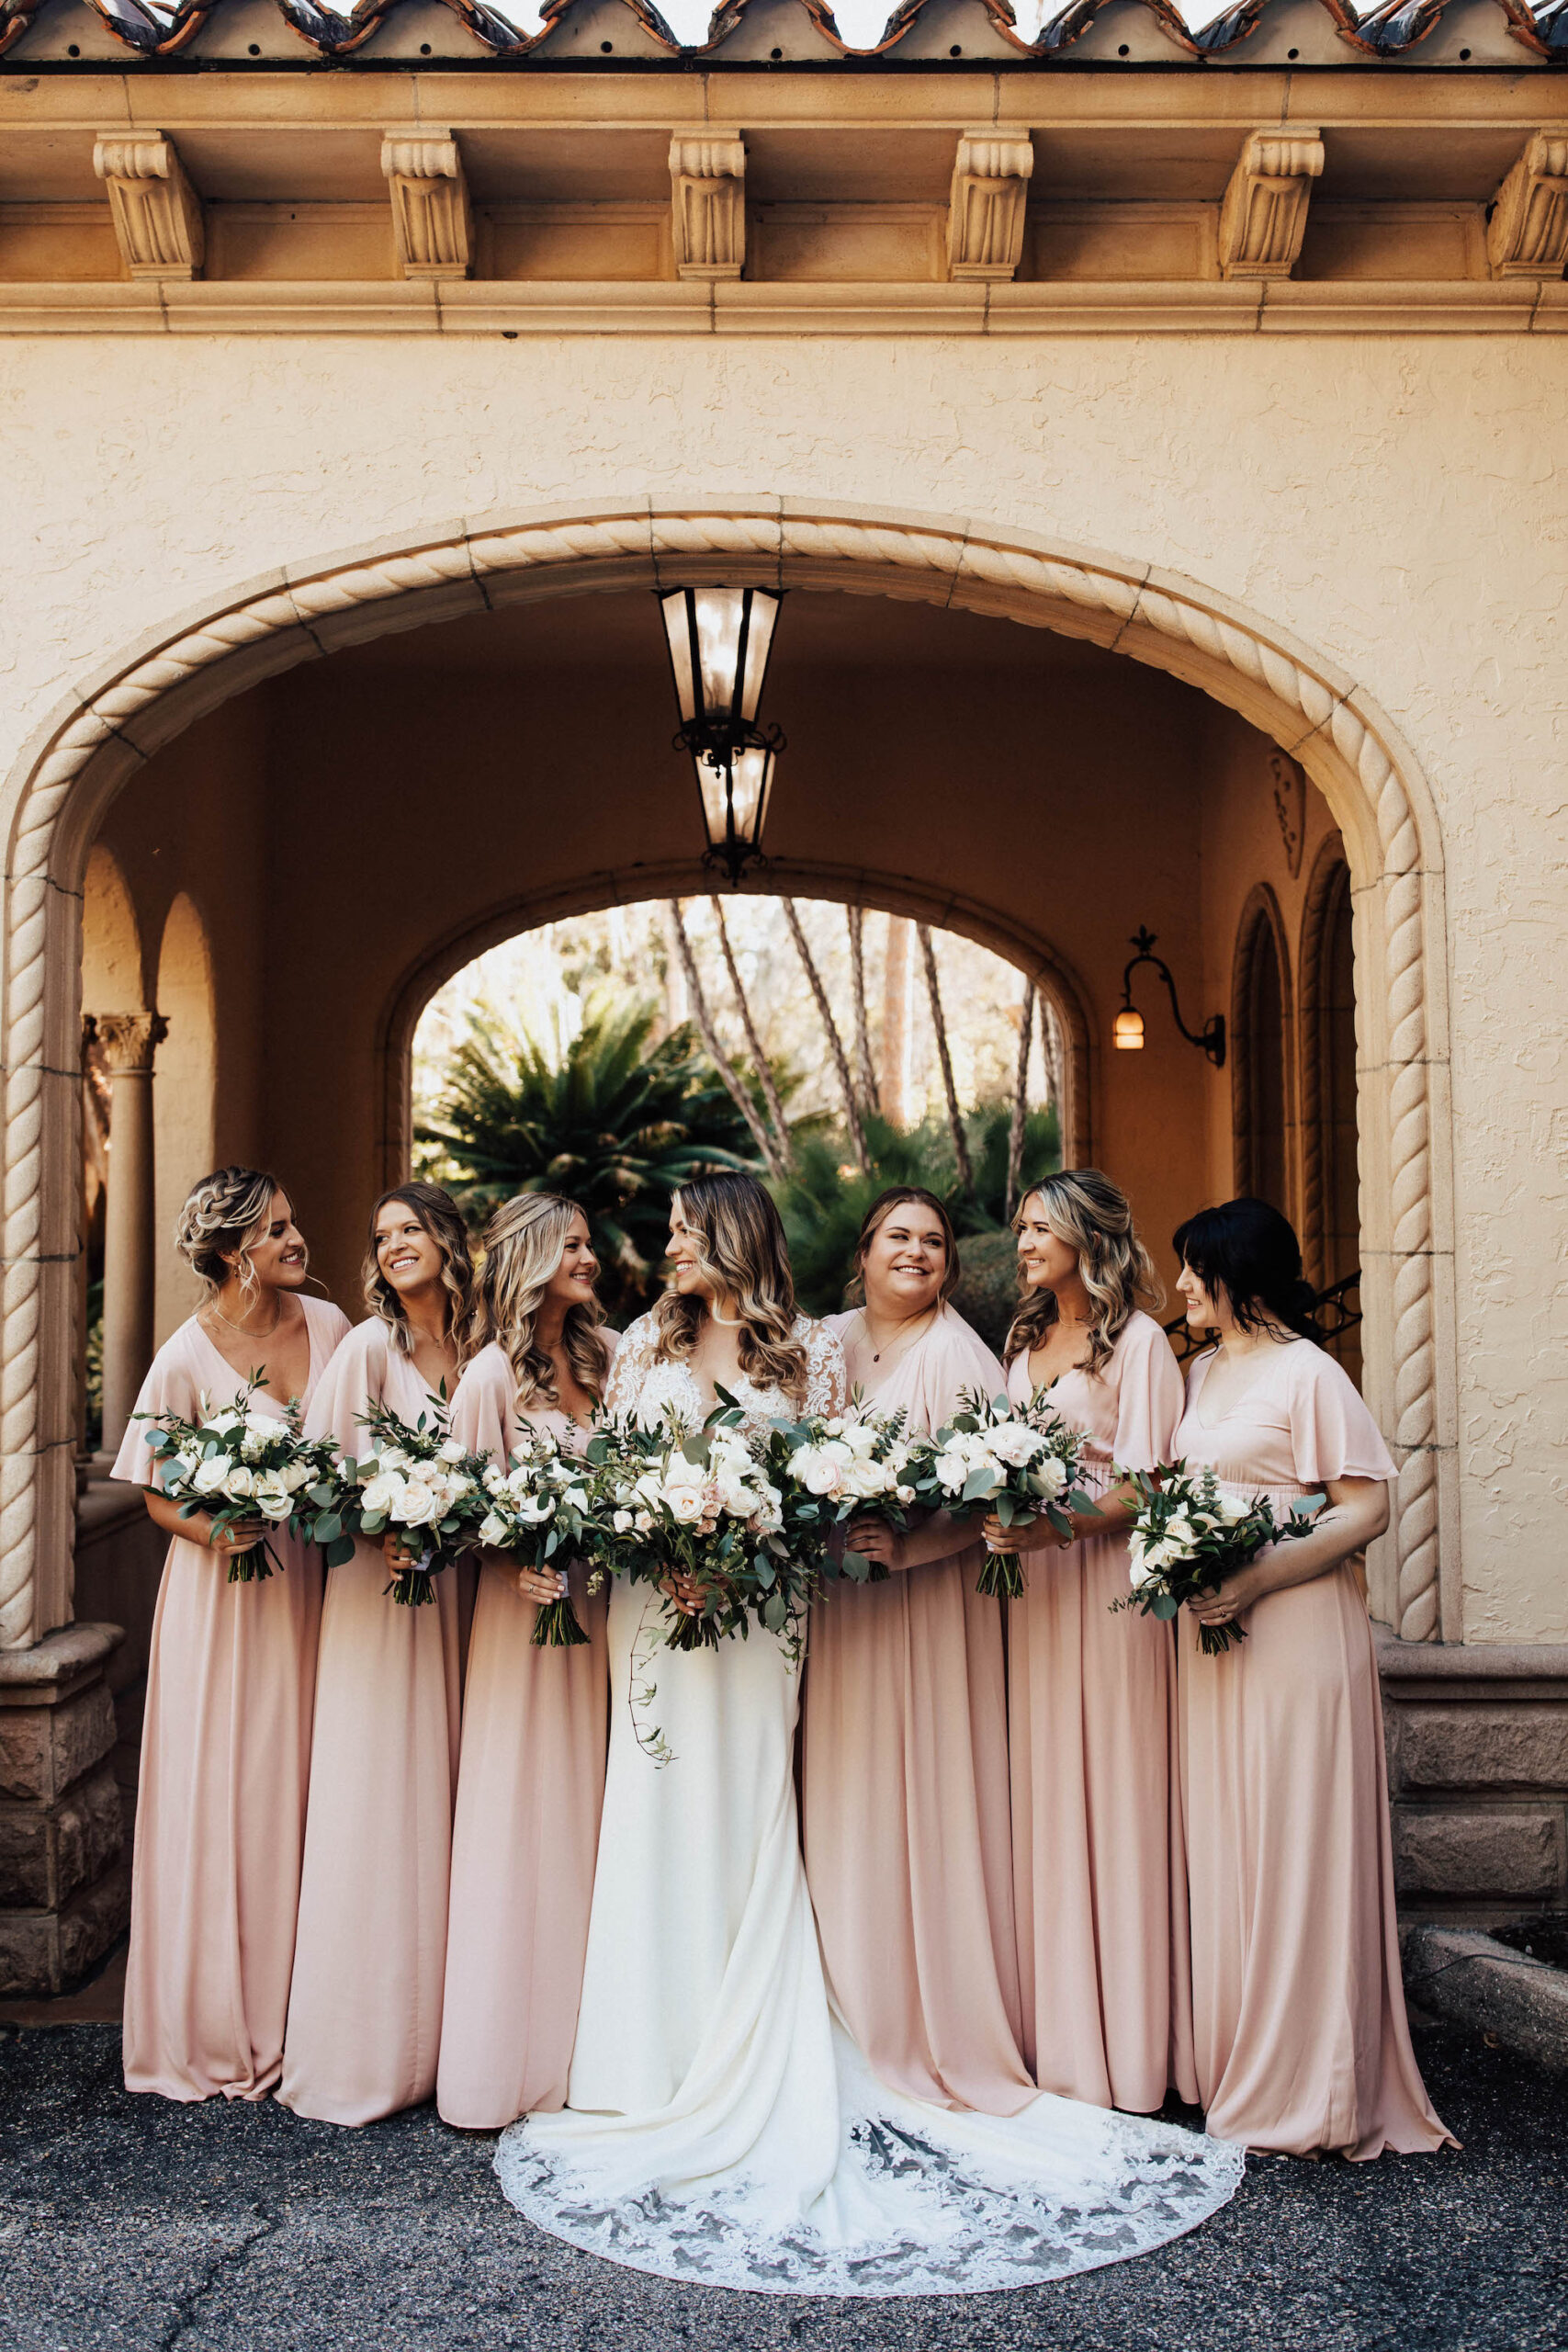 Bride and Bridesmaids in Blush Floor Length Wedding Dresses and White Floral Bouquets | Sarasota Hair and Makeup Artist Femme Akoi